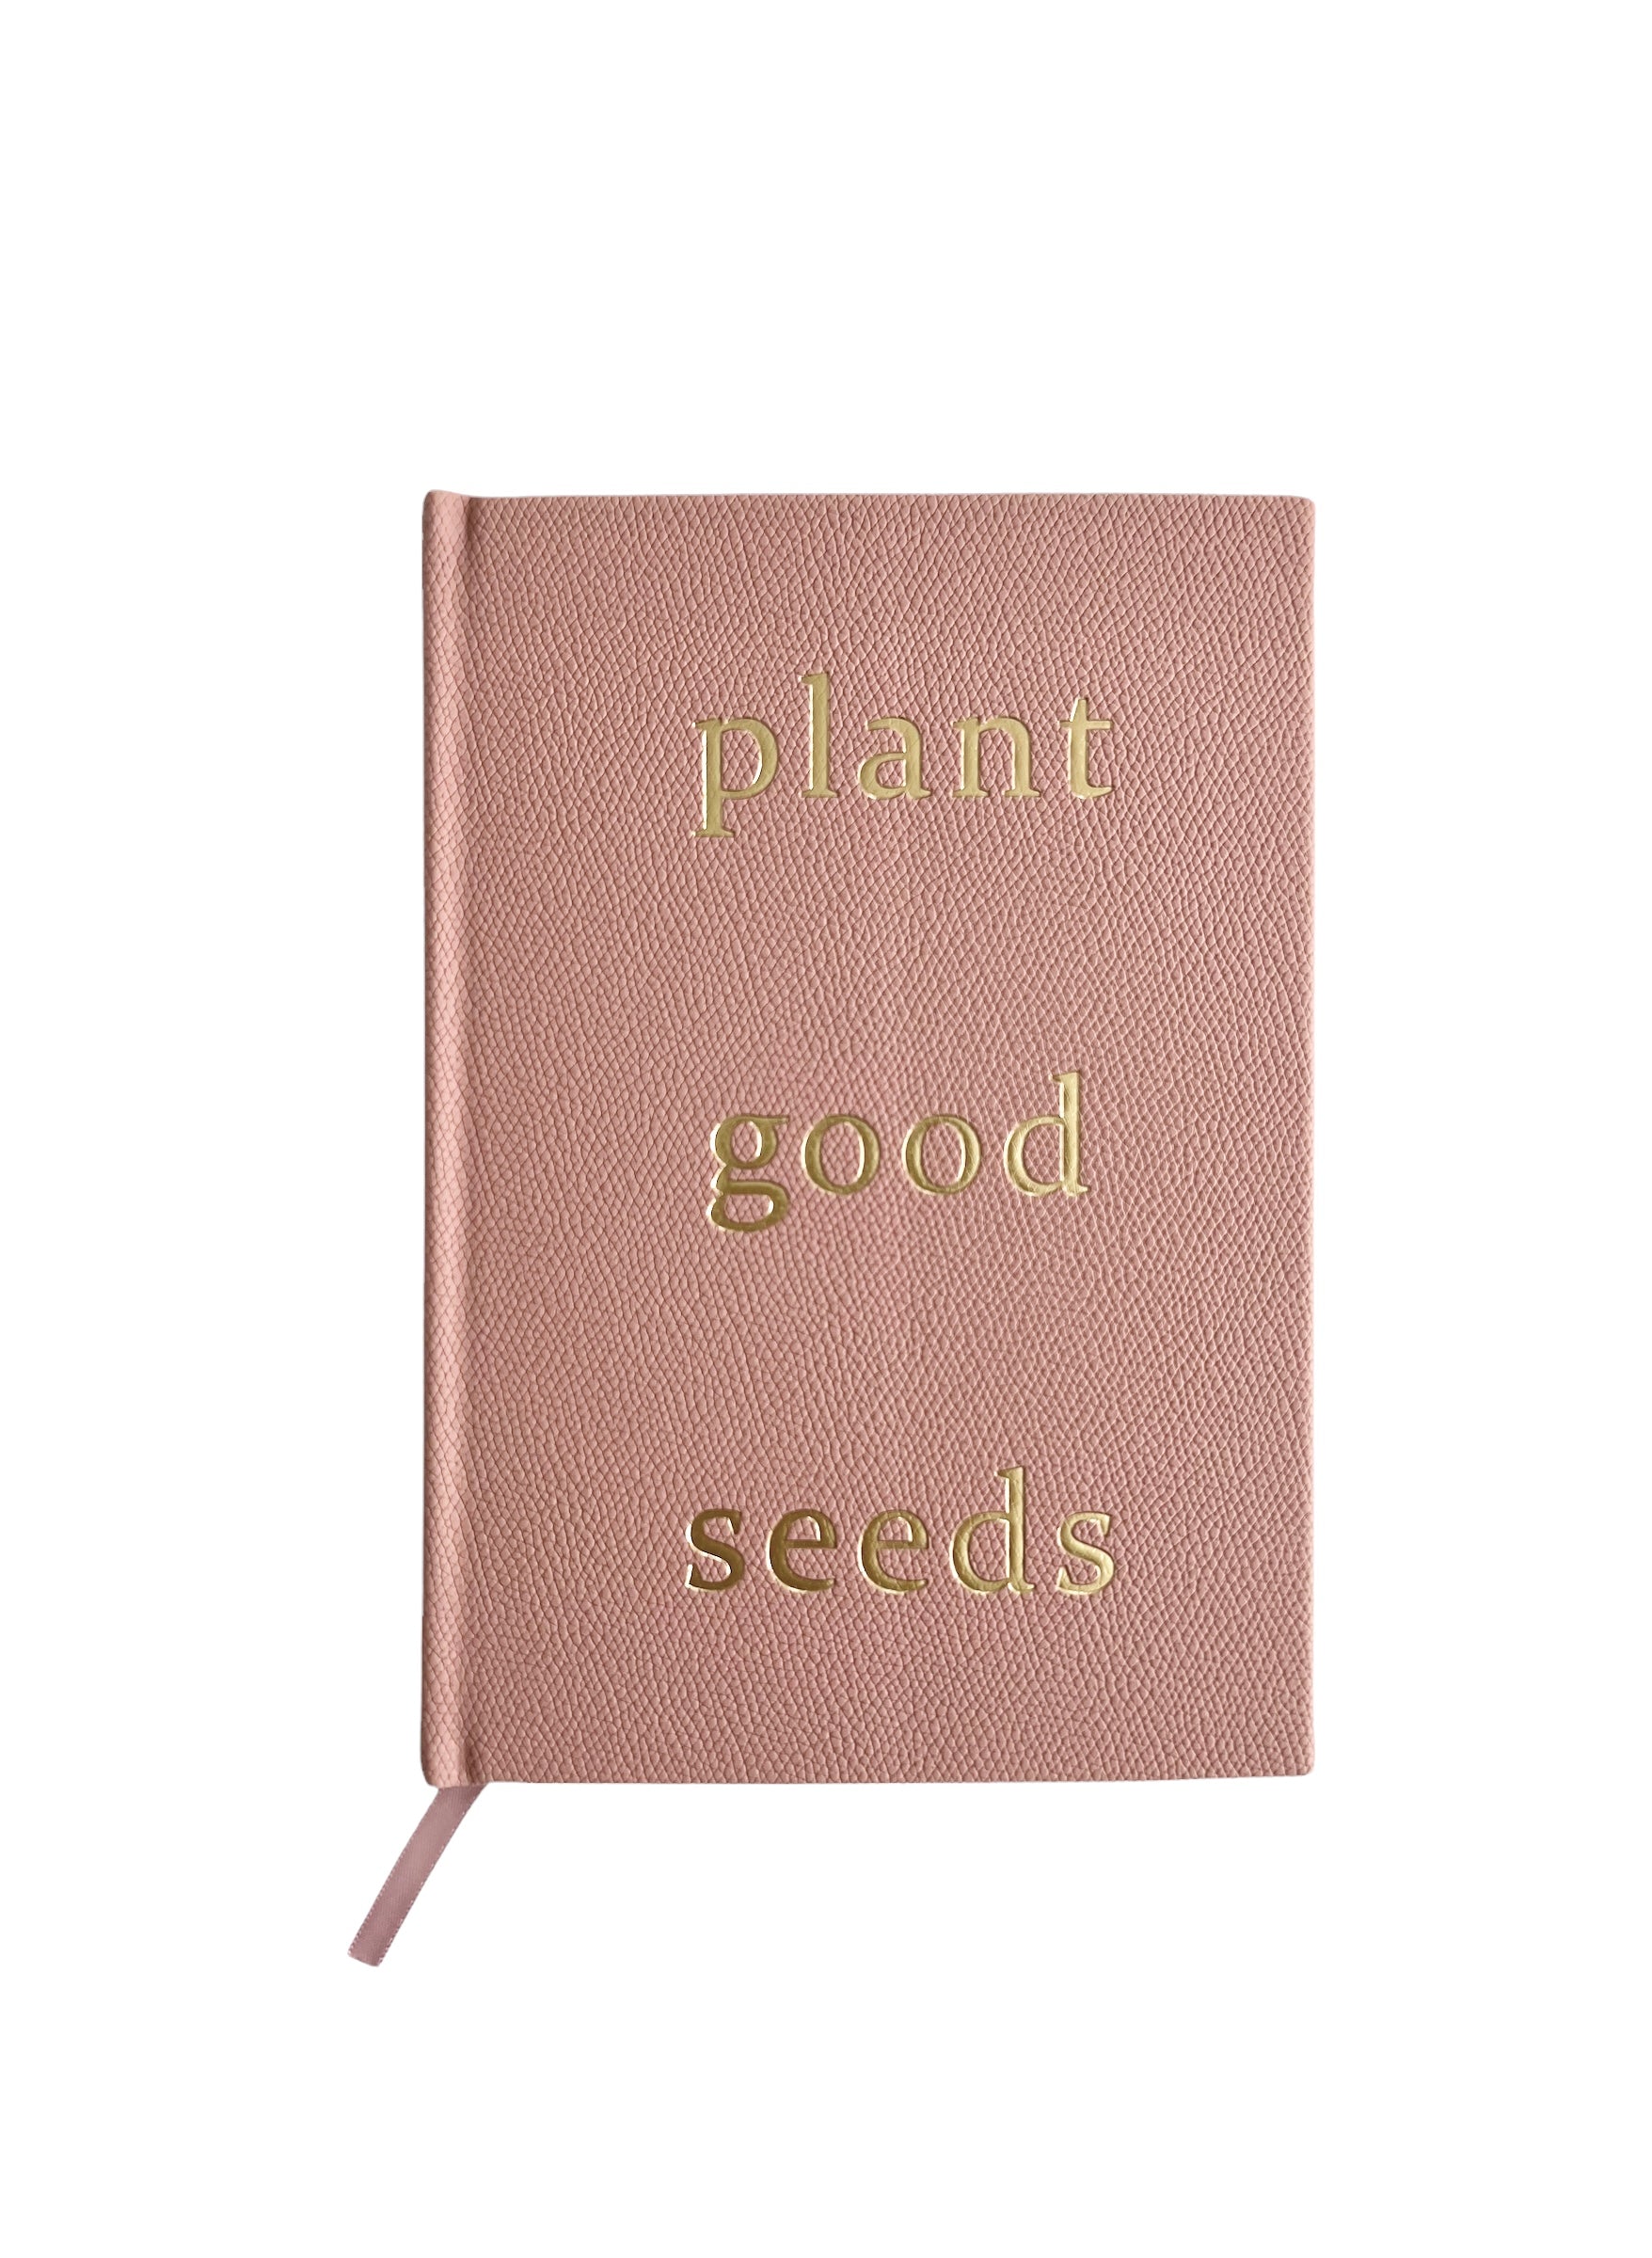 Plant Good Seeds blush vegan leather journal with gold foil